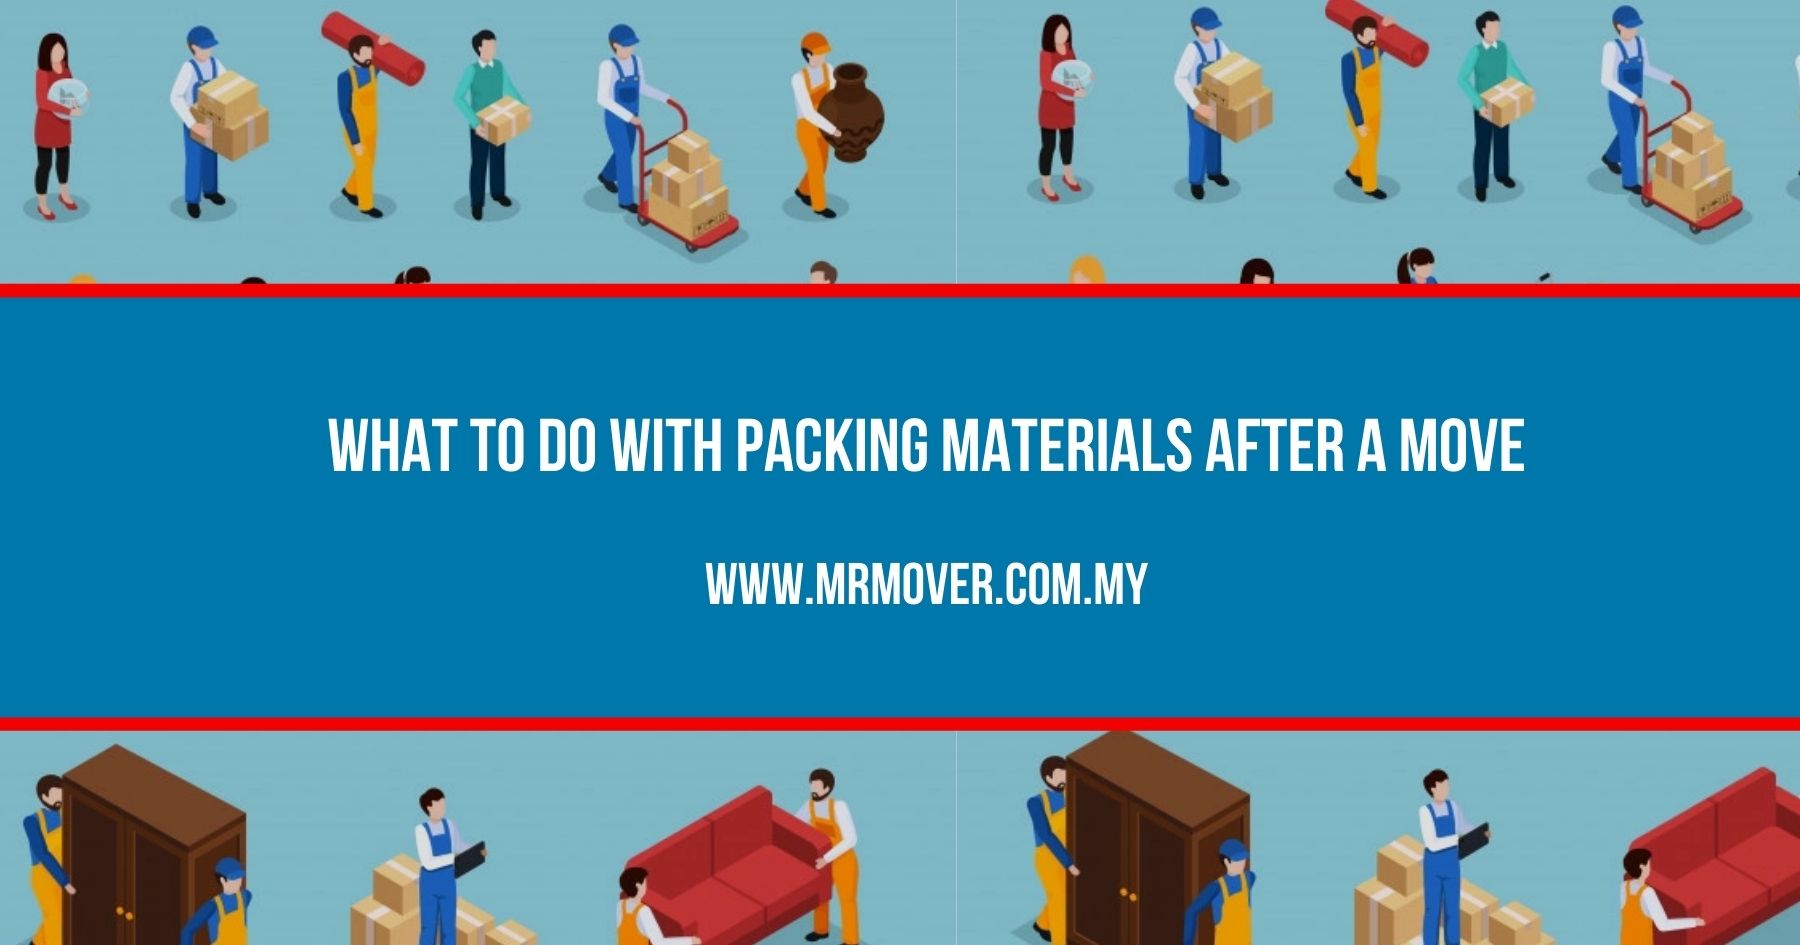 What to Do with Packing Materials After a Move